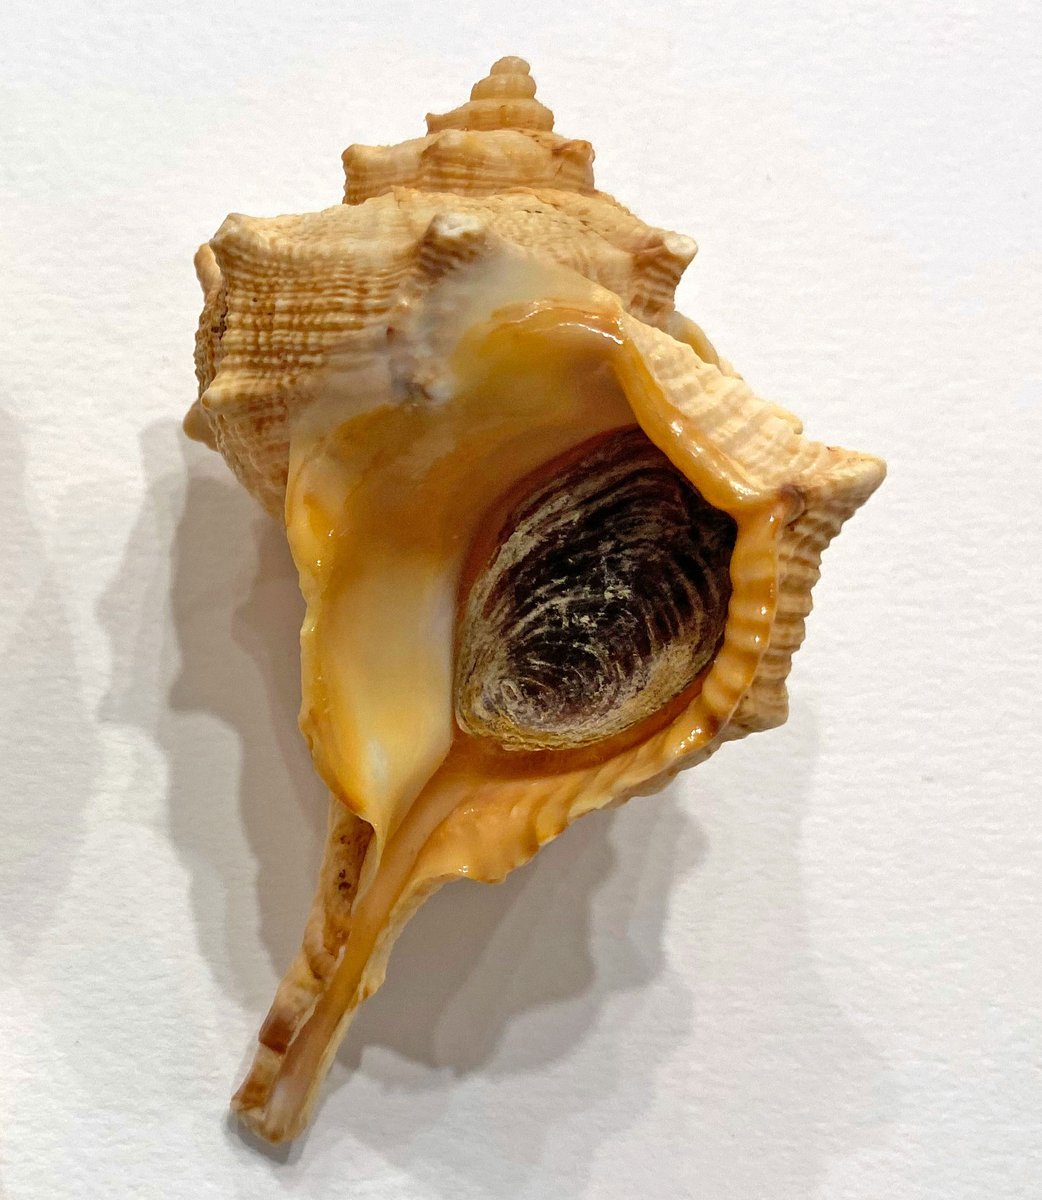 In short: the letters in the book you are reading today, and the near universal adoption of movable type printing in the West, both depend on these sea-snails.  10/